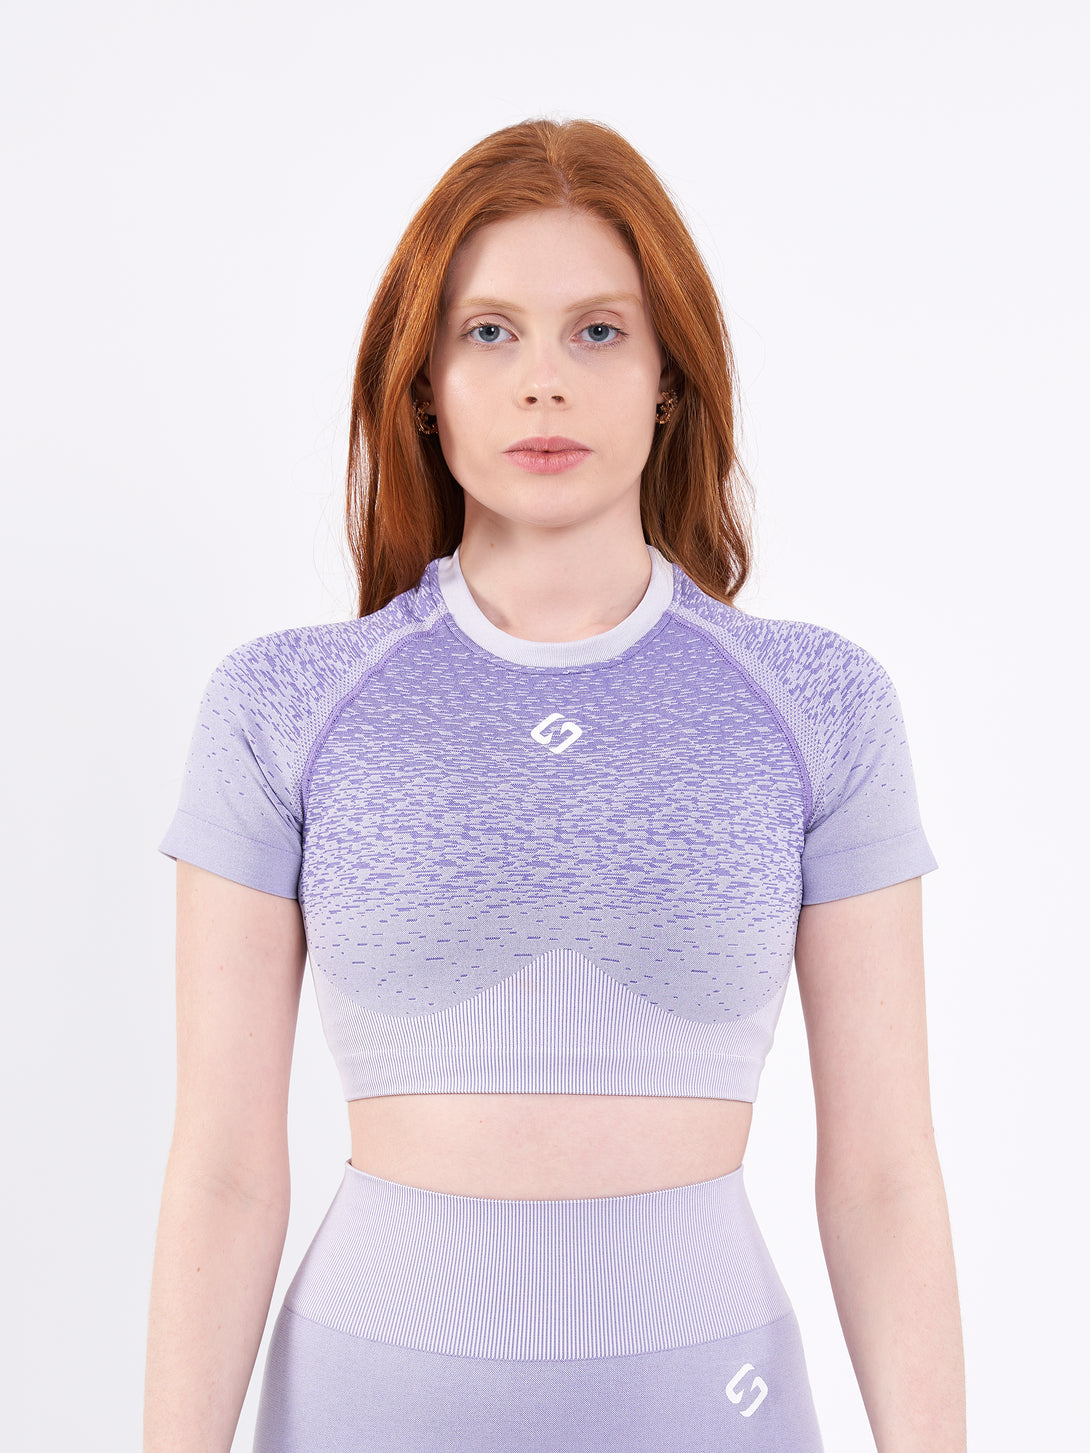 A Woman Wearing Paisley Purple Color Seamless Crop Top with Ombre Effect. Chic Comfort